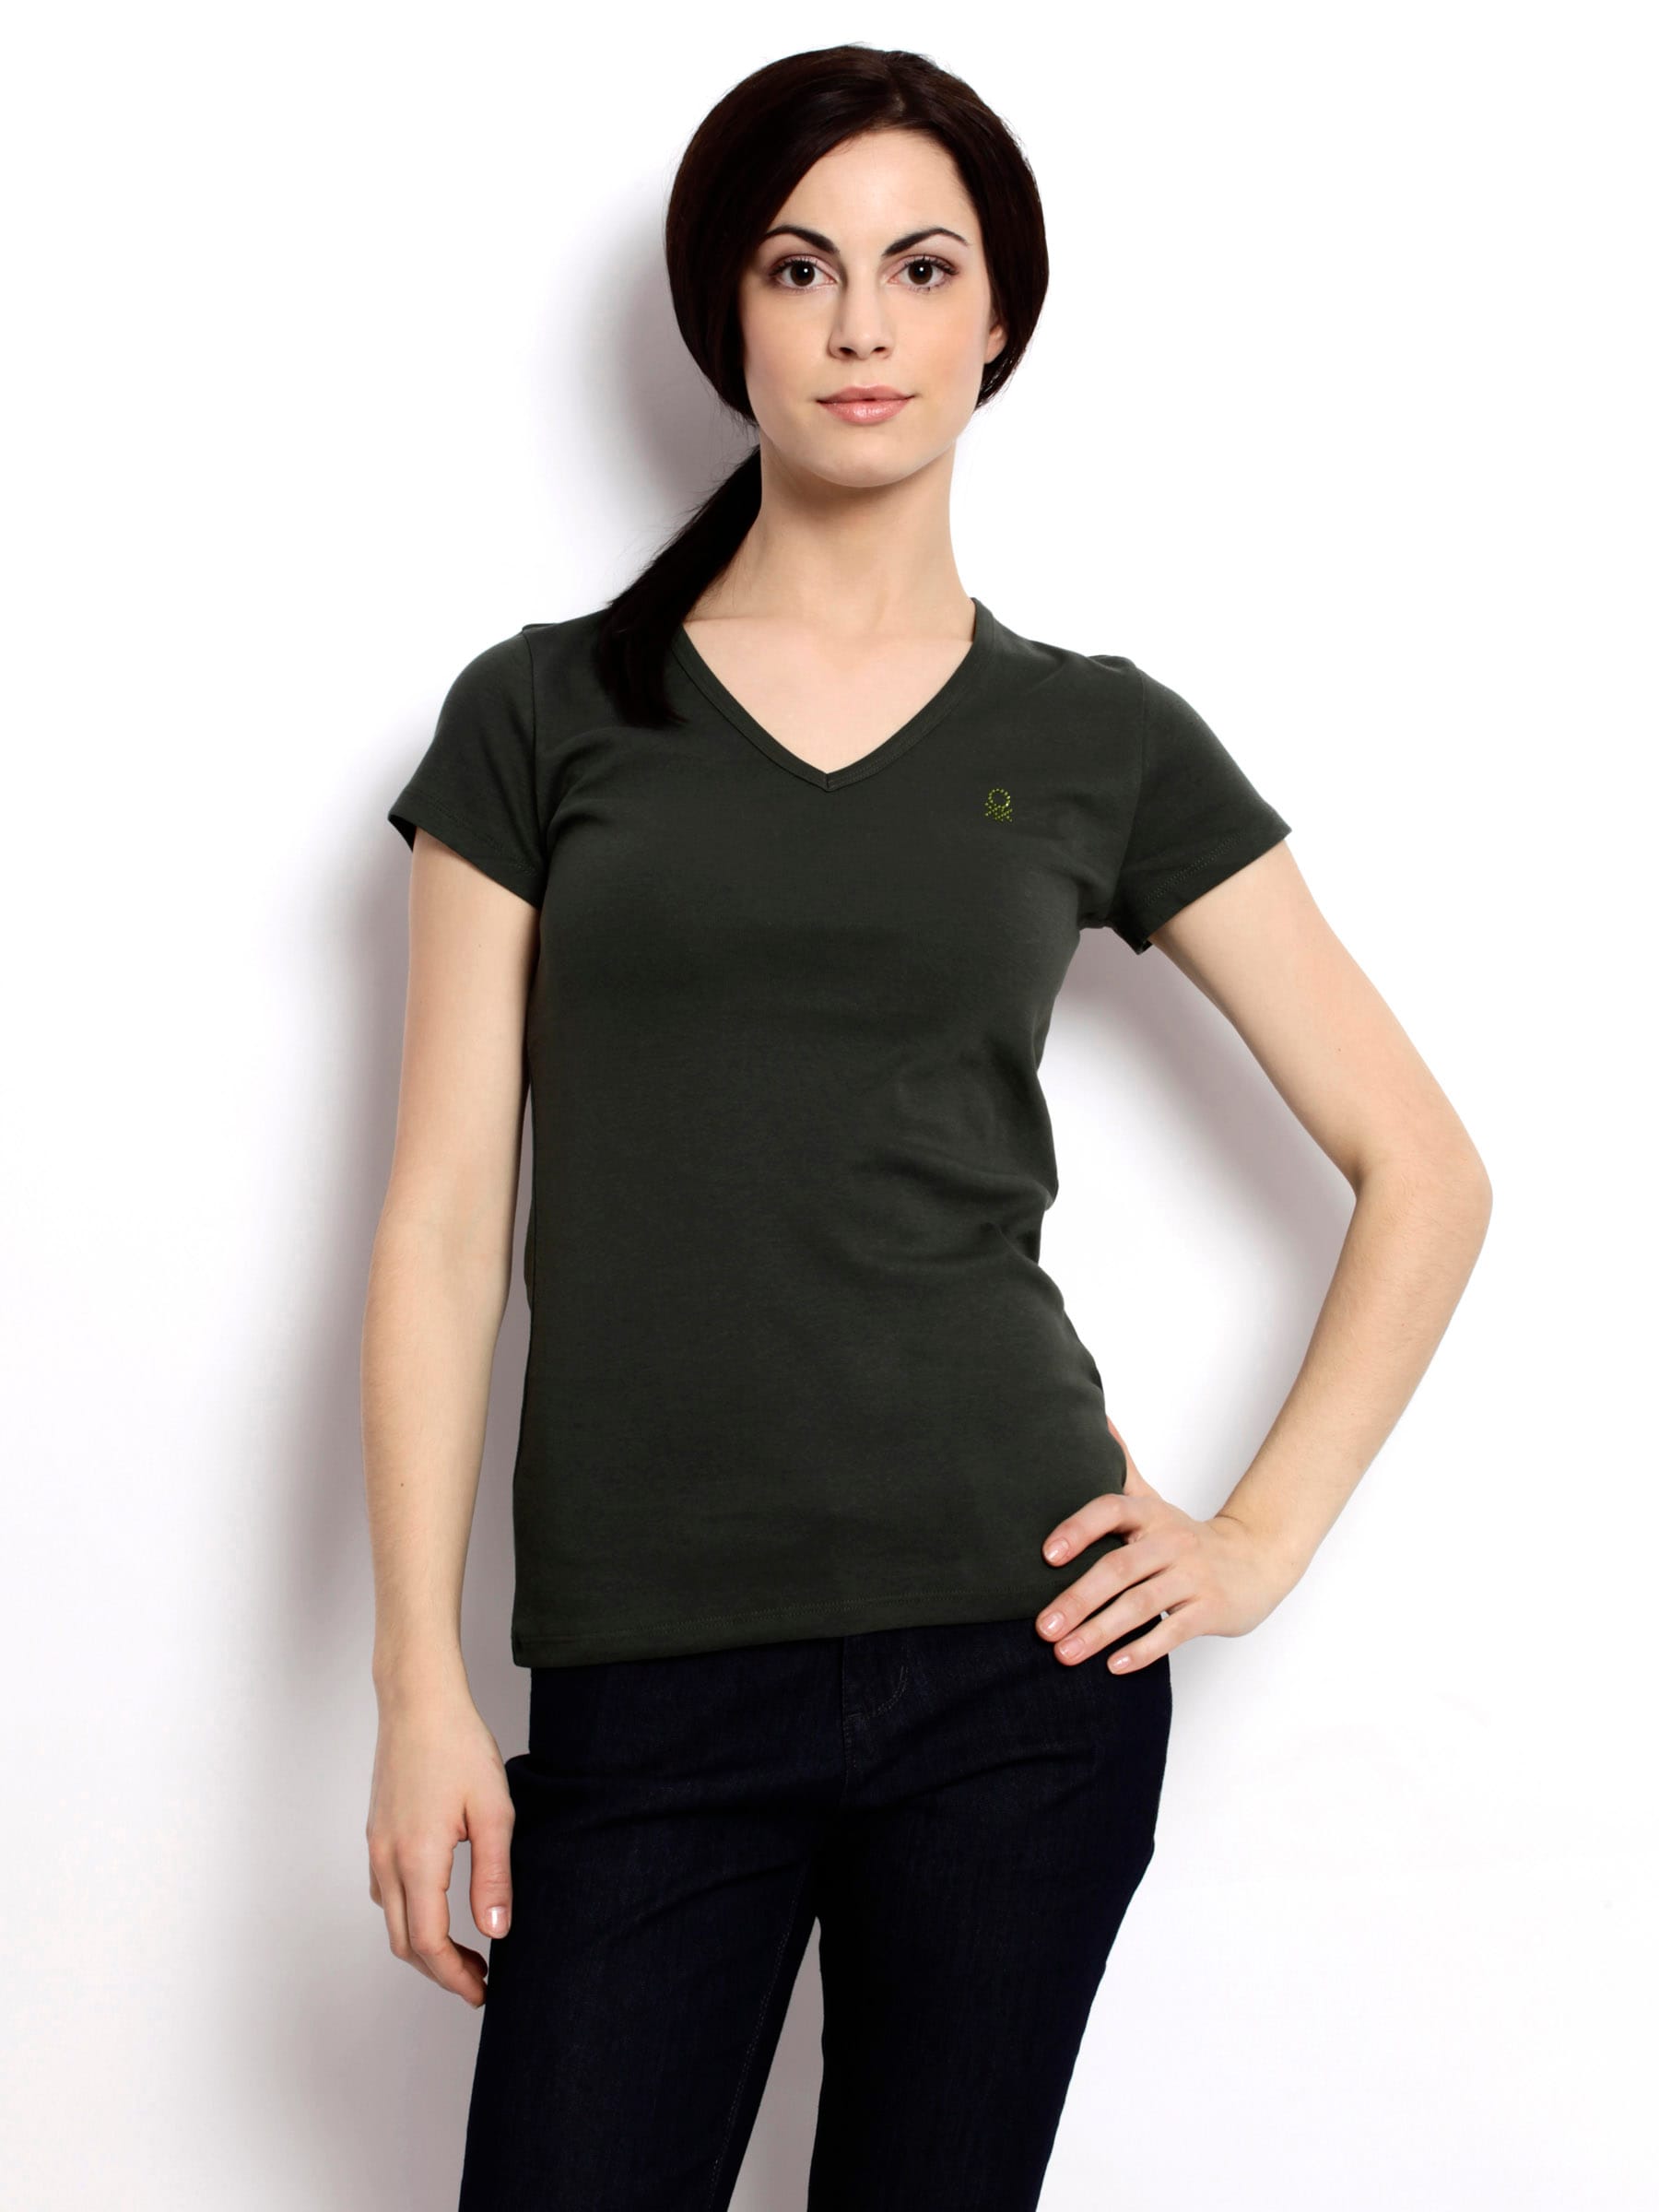 United Colors of Benetton Women Solid Olive Top